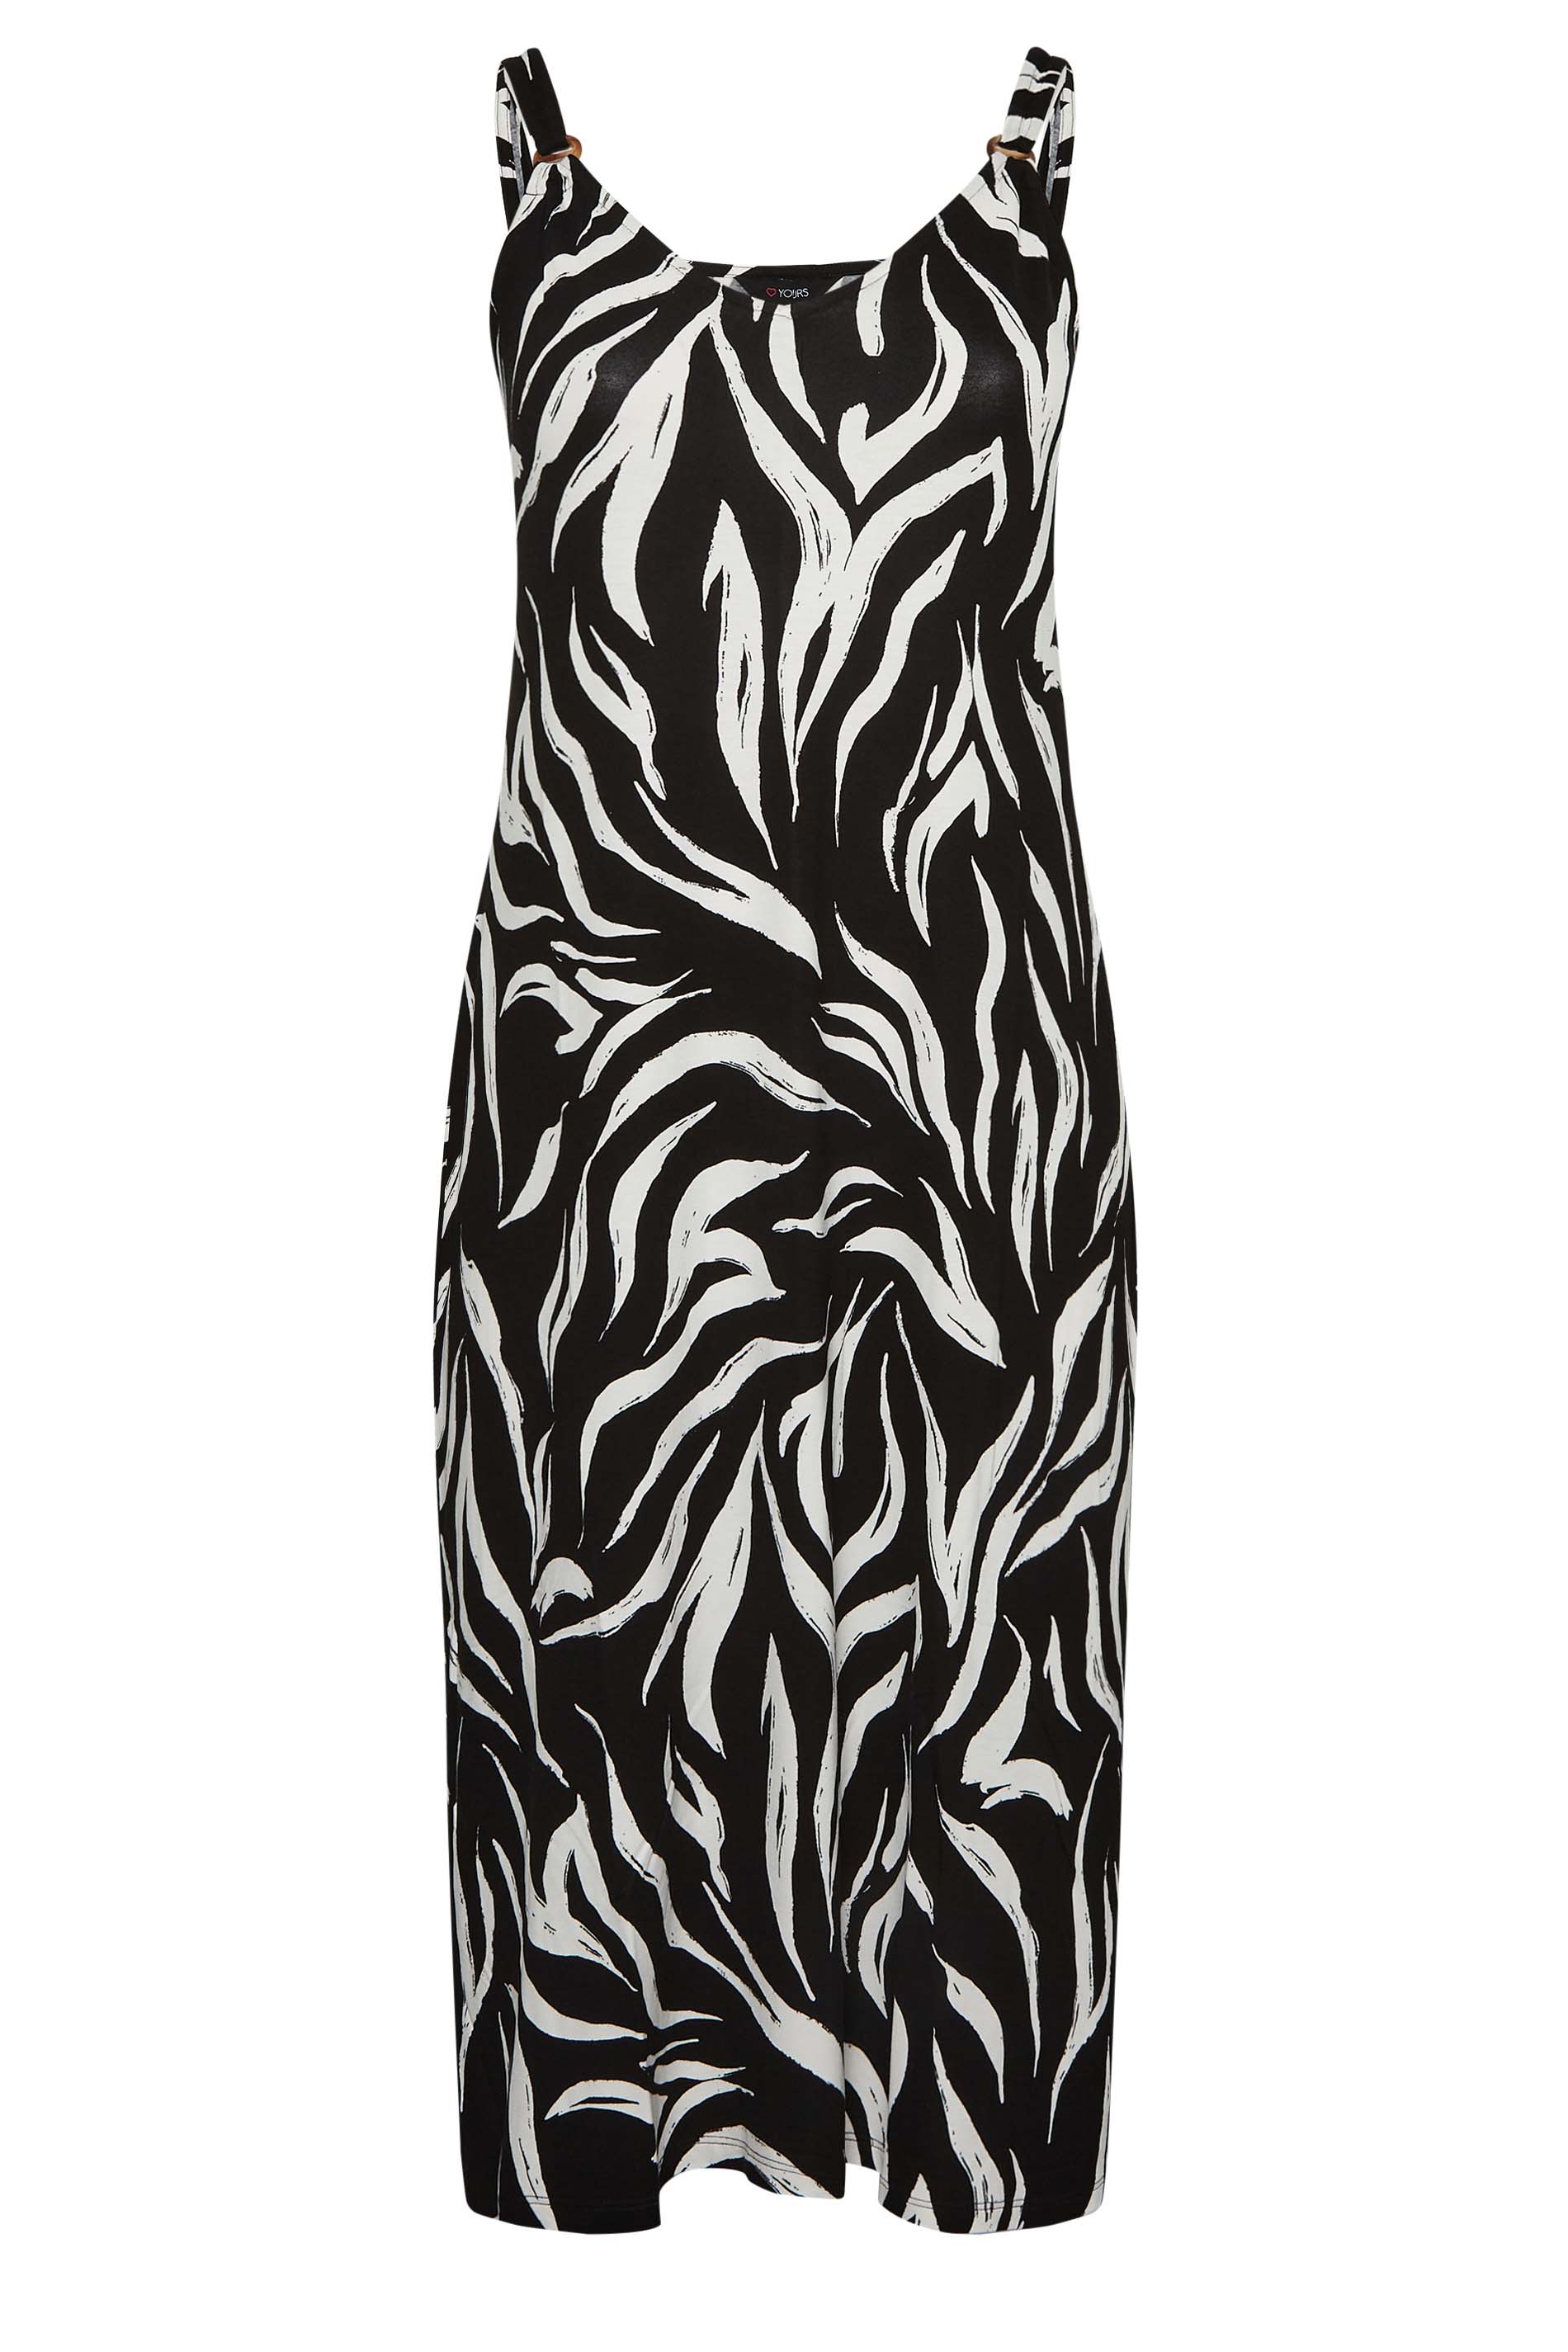 YOURS Plus Size Black Animal Print Beach Dress | Yours Clothing 3